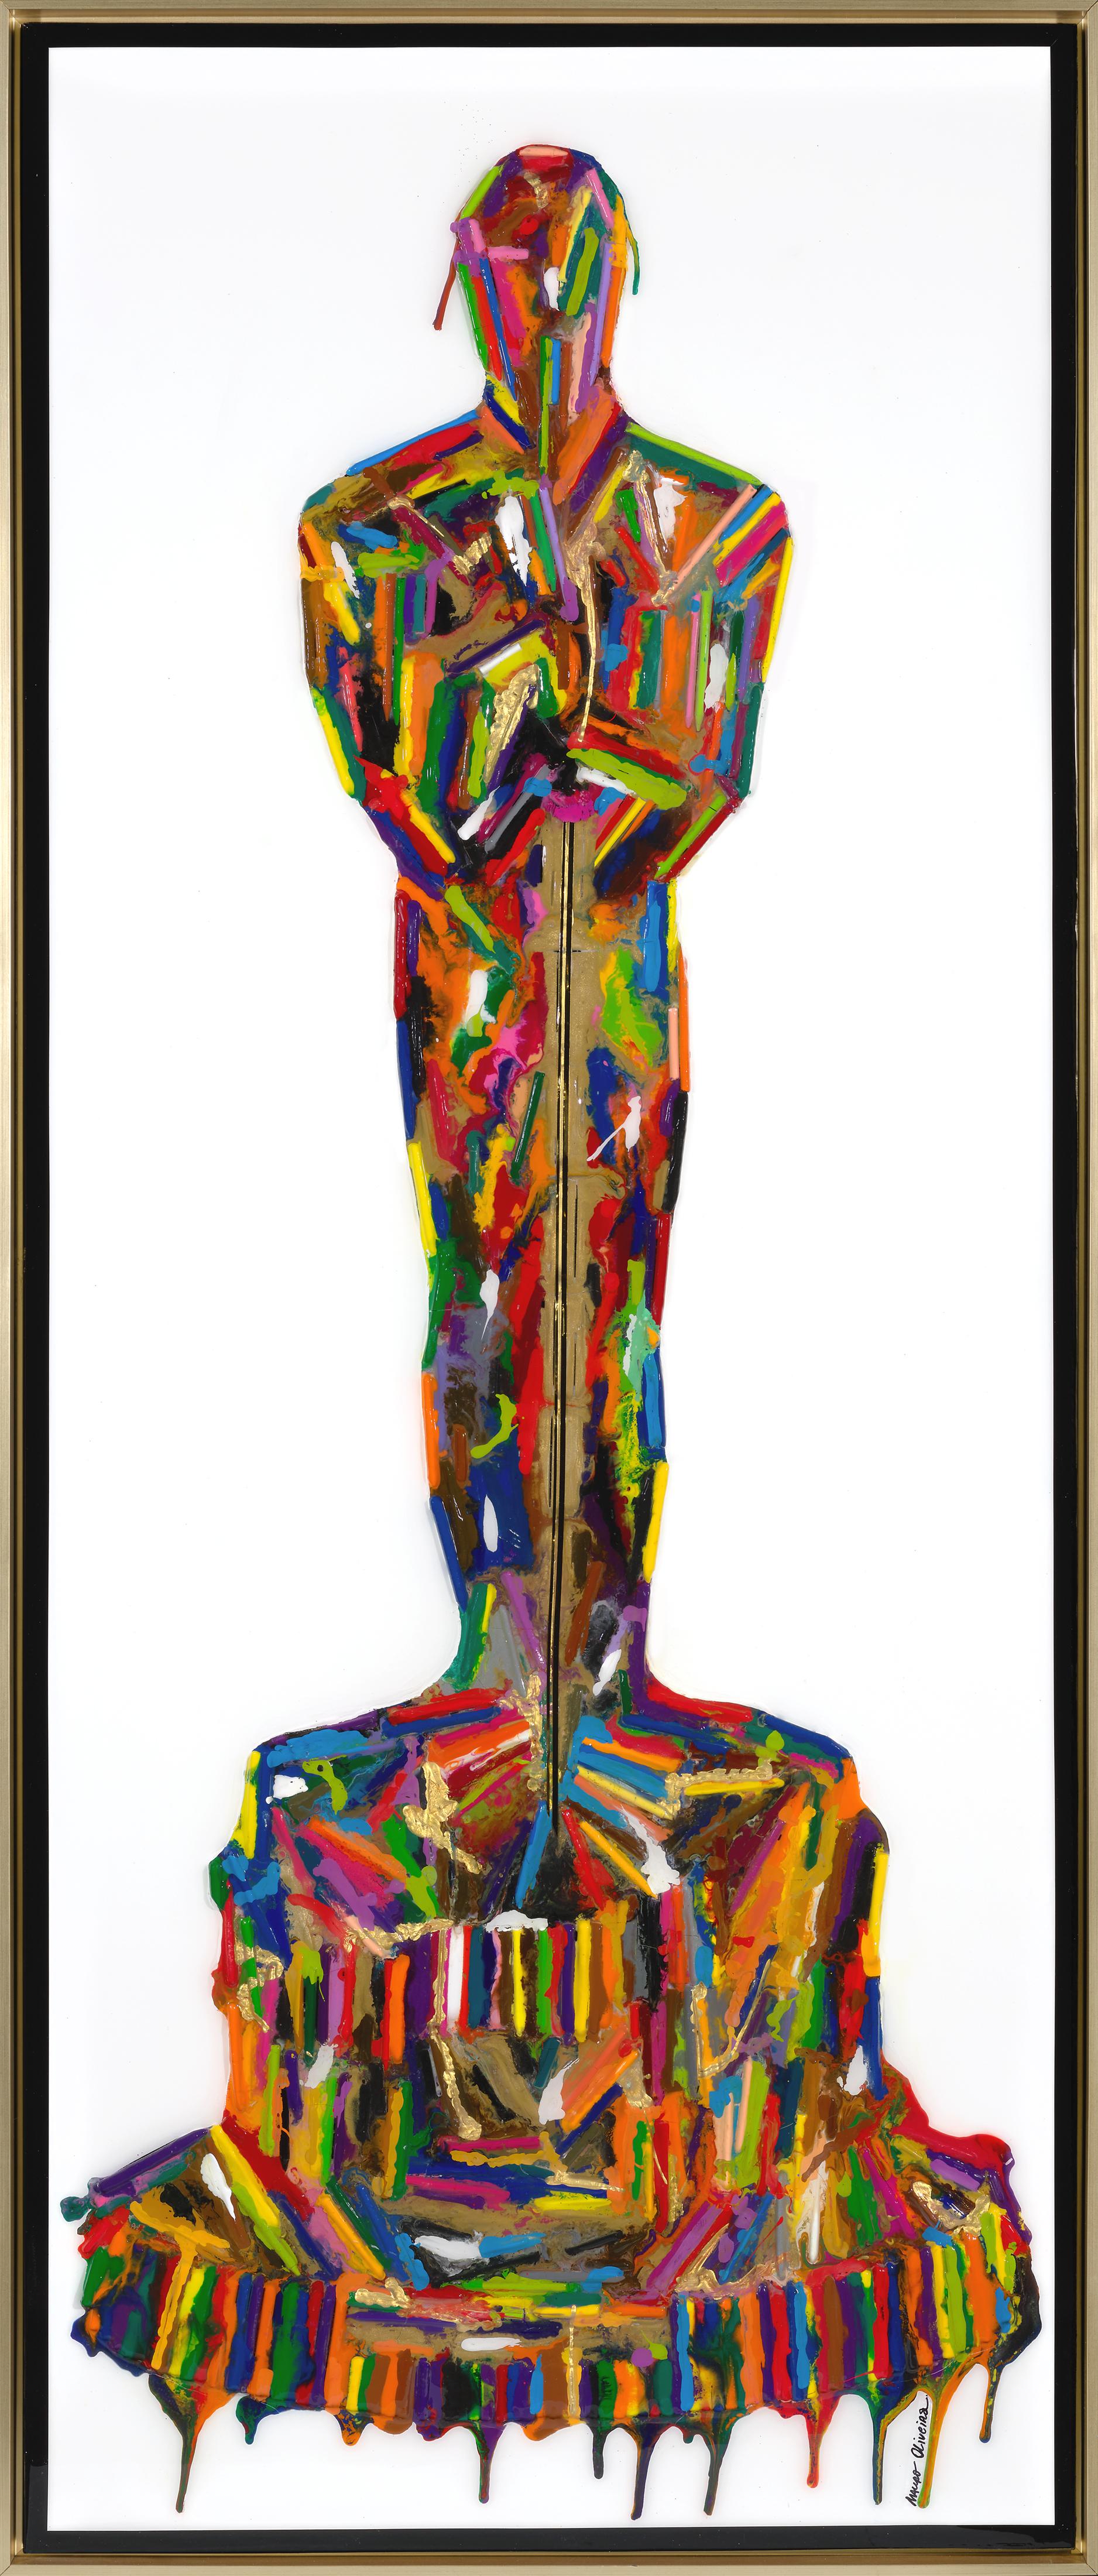 Mauro Oliveira Figurative Print - Melted Oscar II (Limited Edition Of Only 30 Prints)